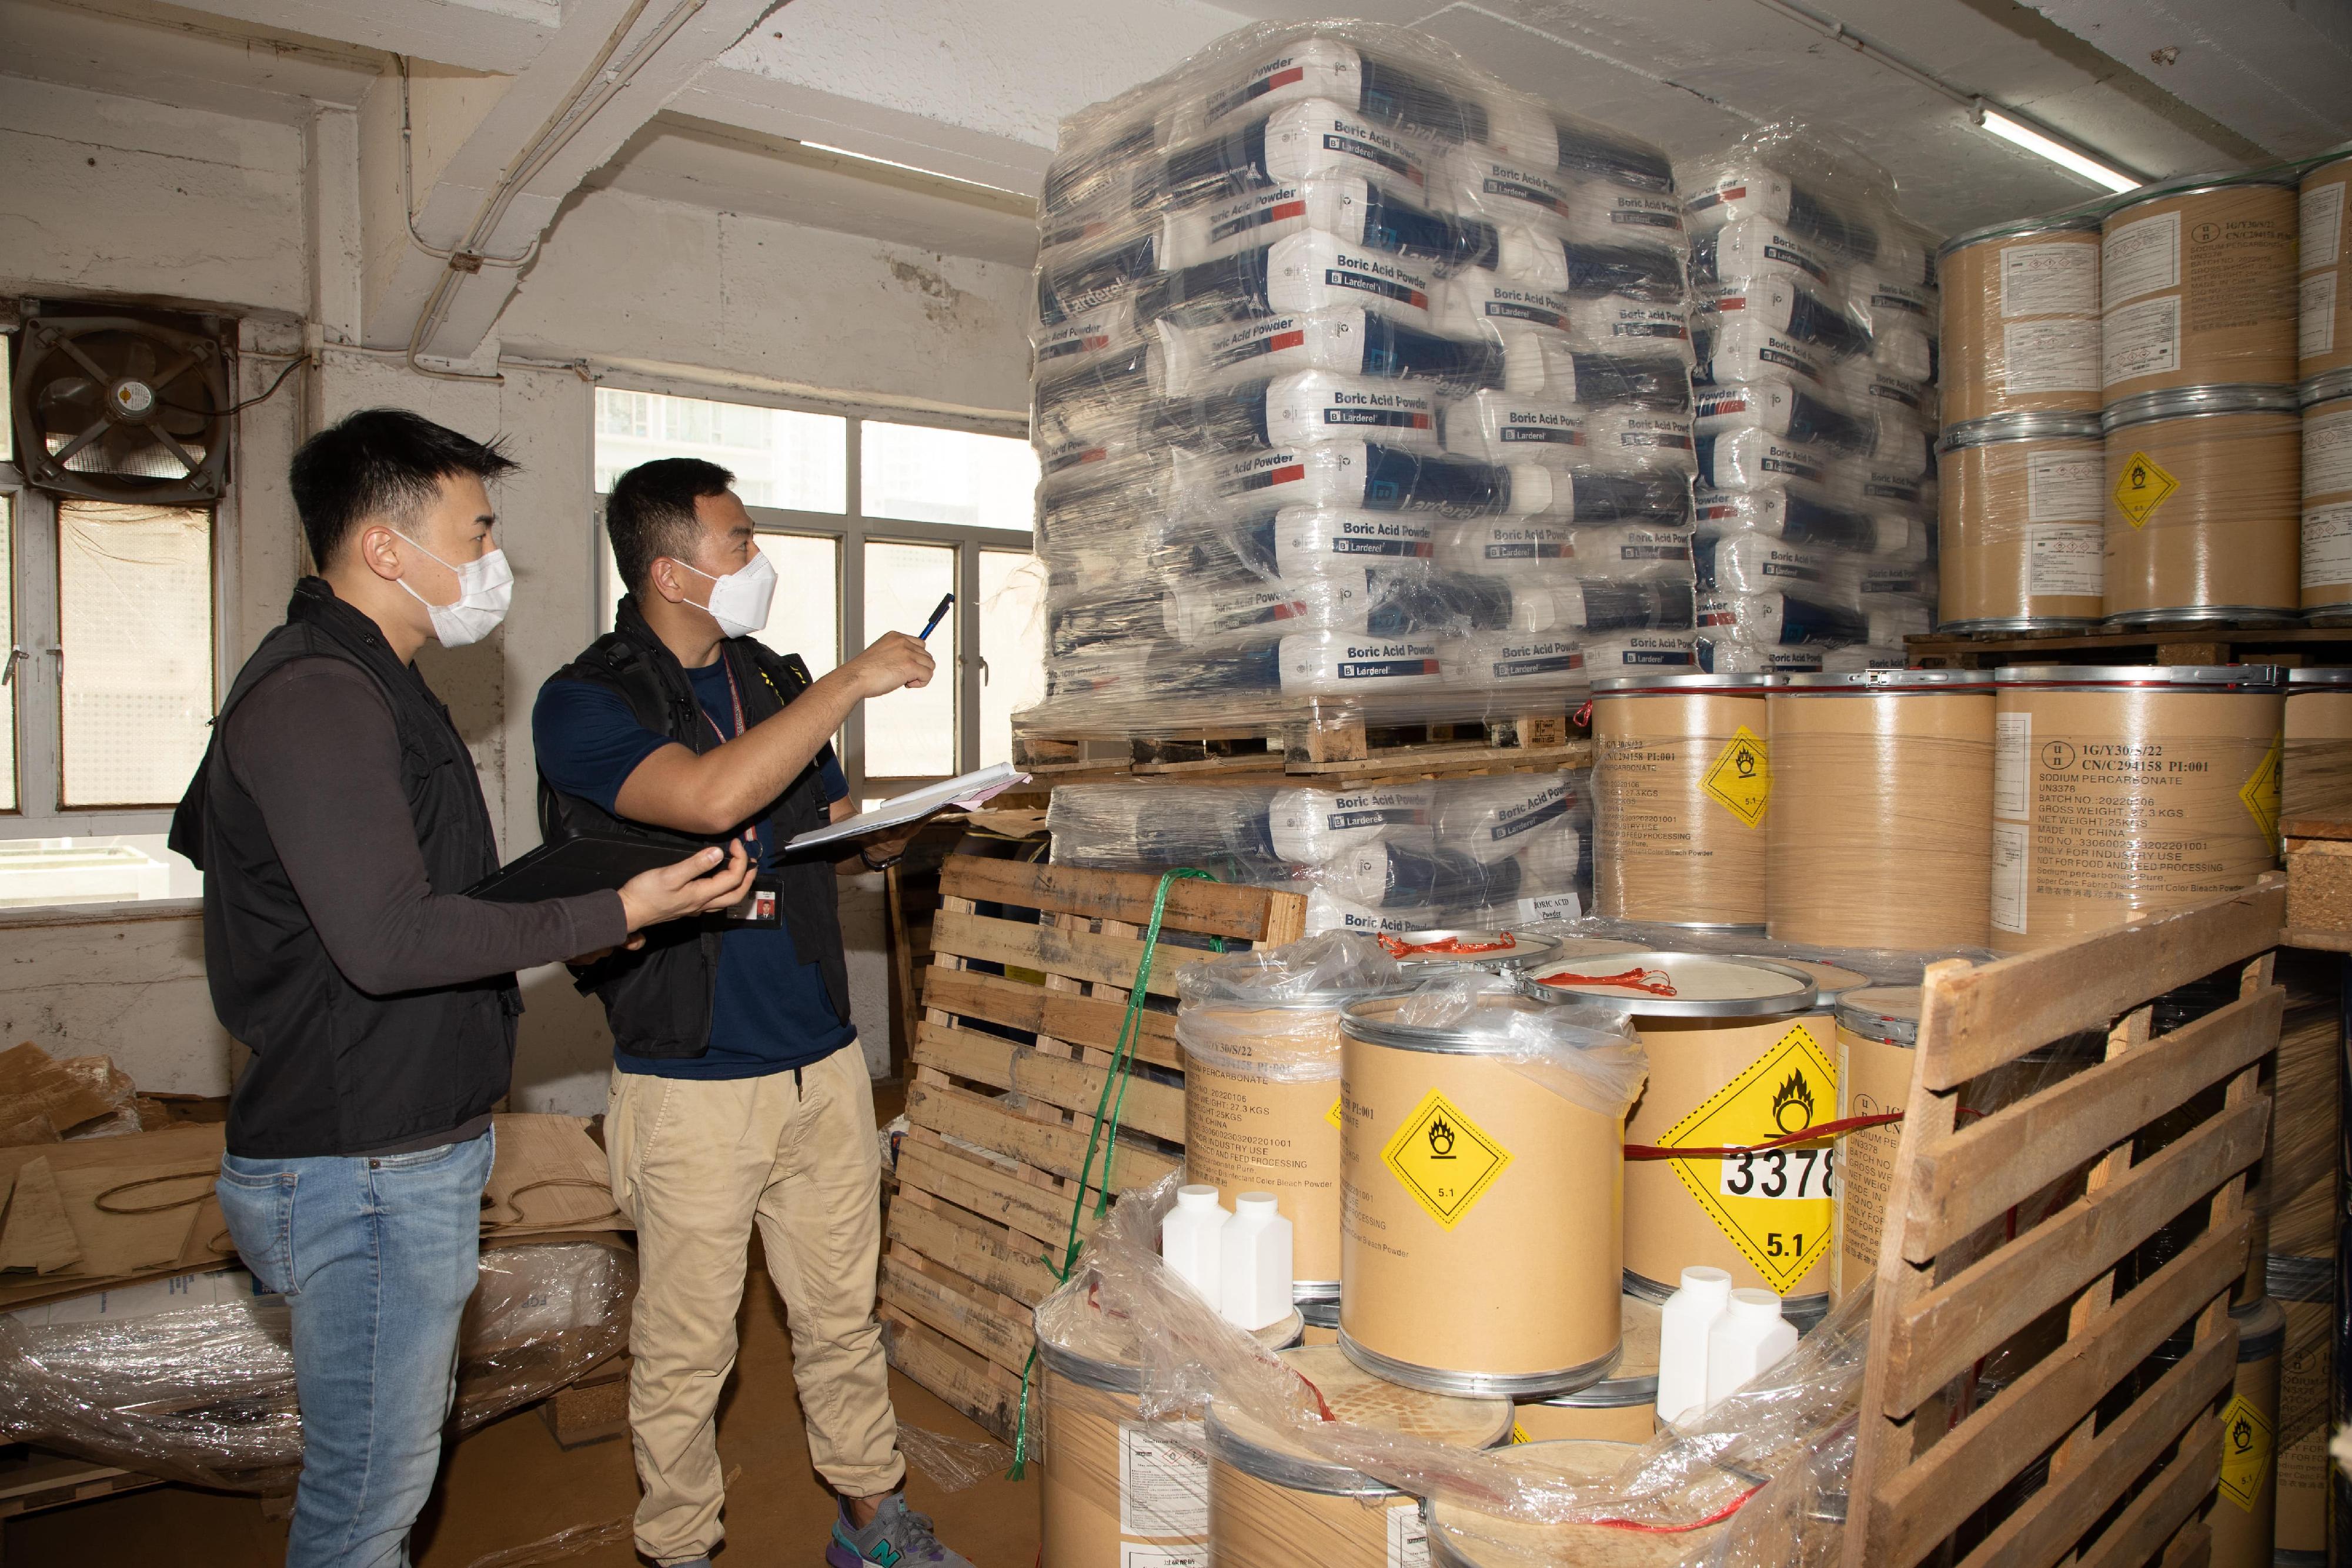 The Fire Services Department mounted a territory-wide enforcement operation codenamed "Crescent" in June. Photo shows law enforcement officers inspecting a premises suspected to be storing an excessive amount of dangerous goods.